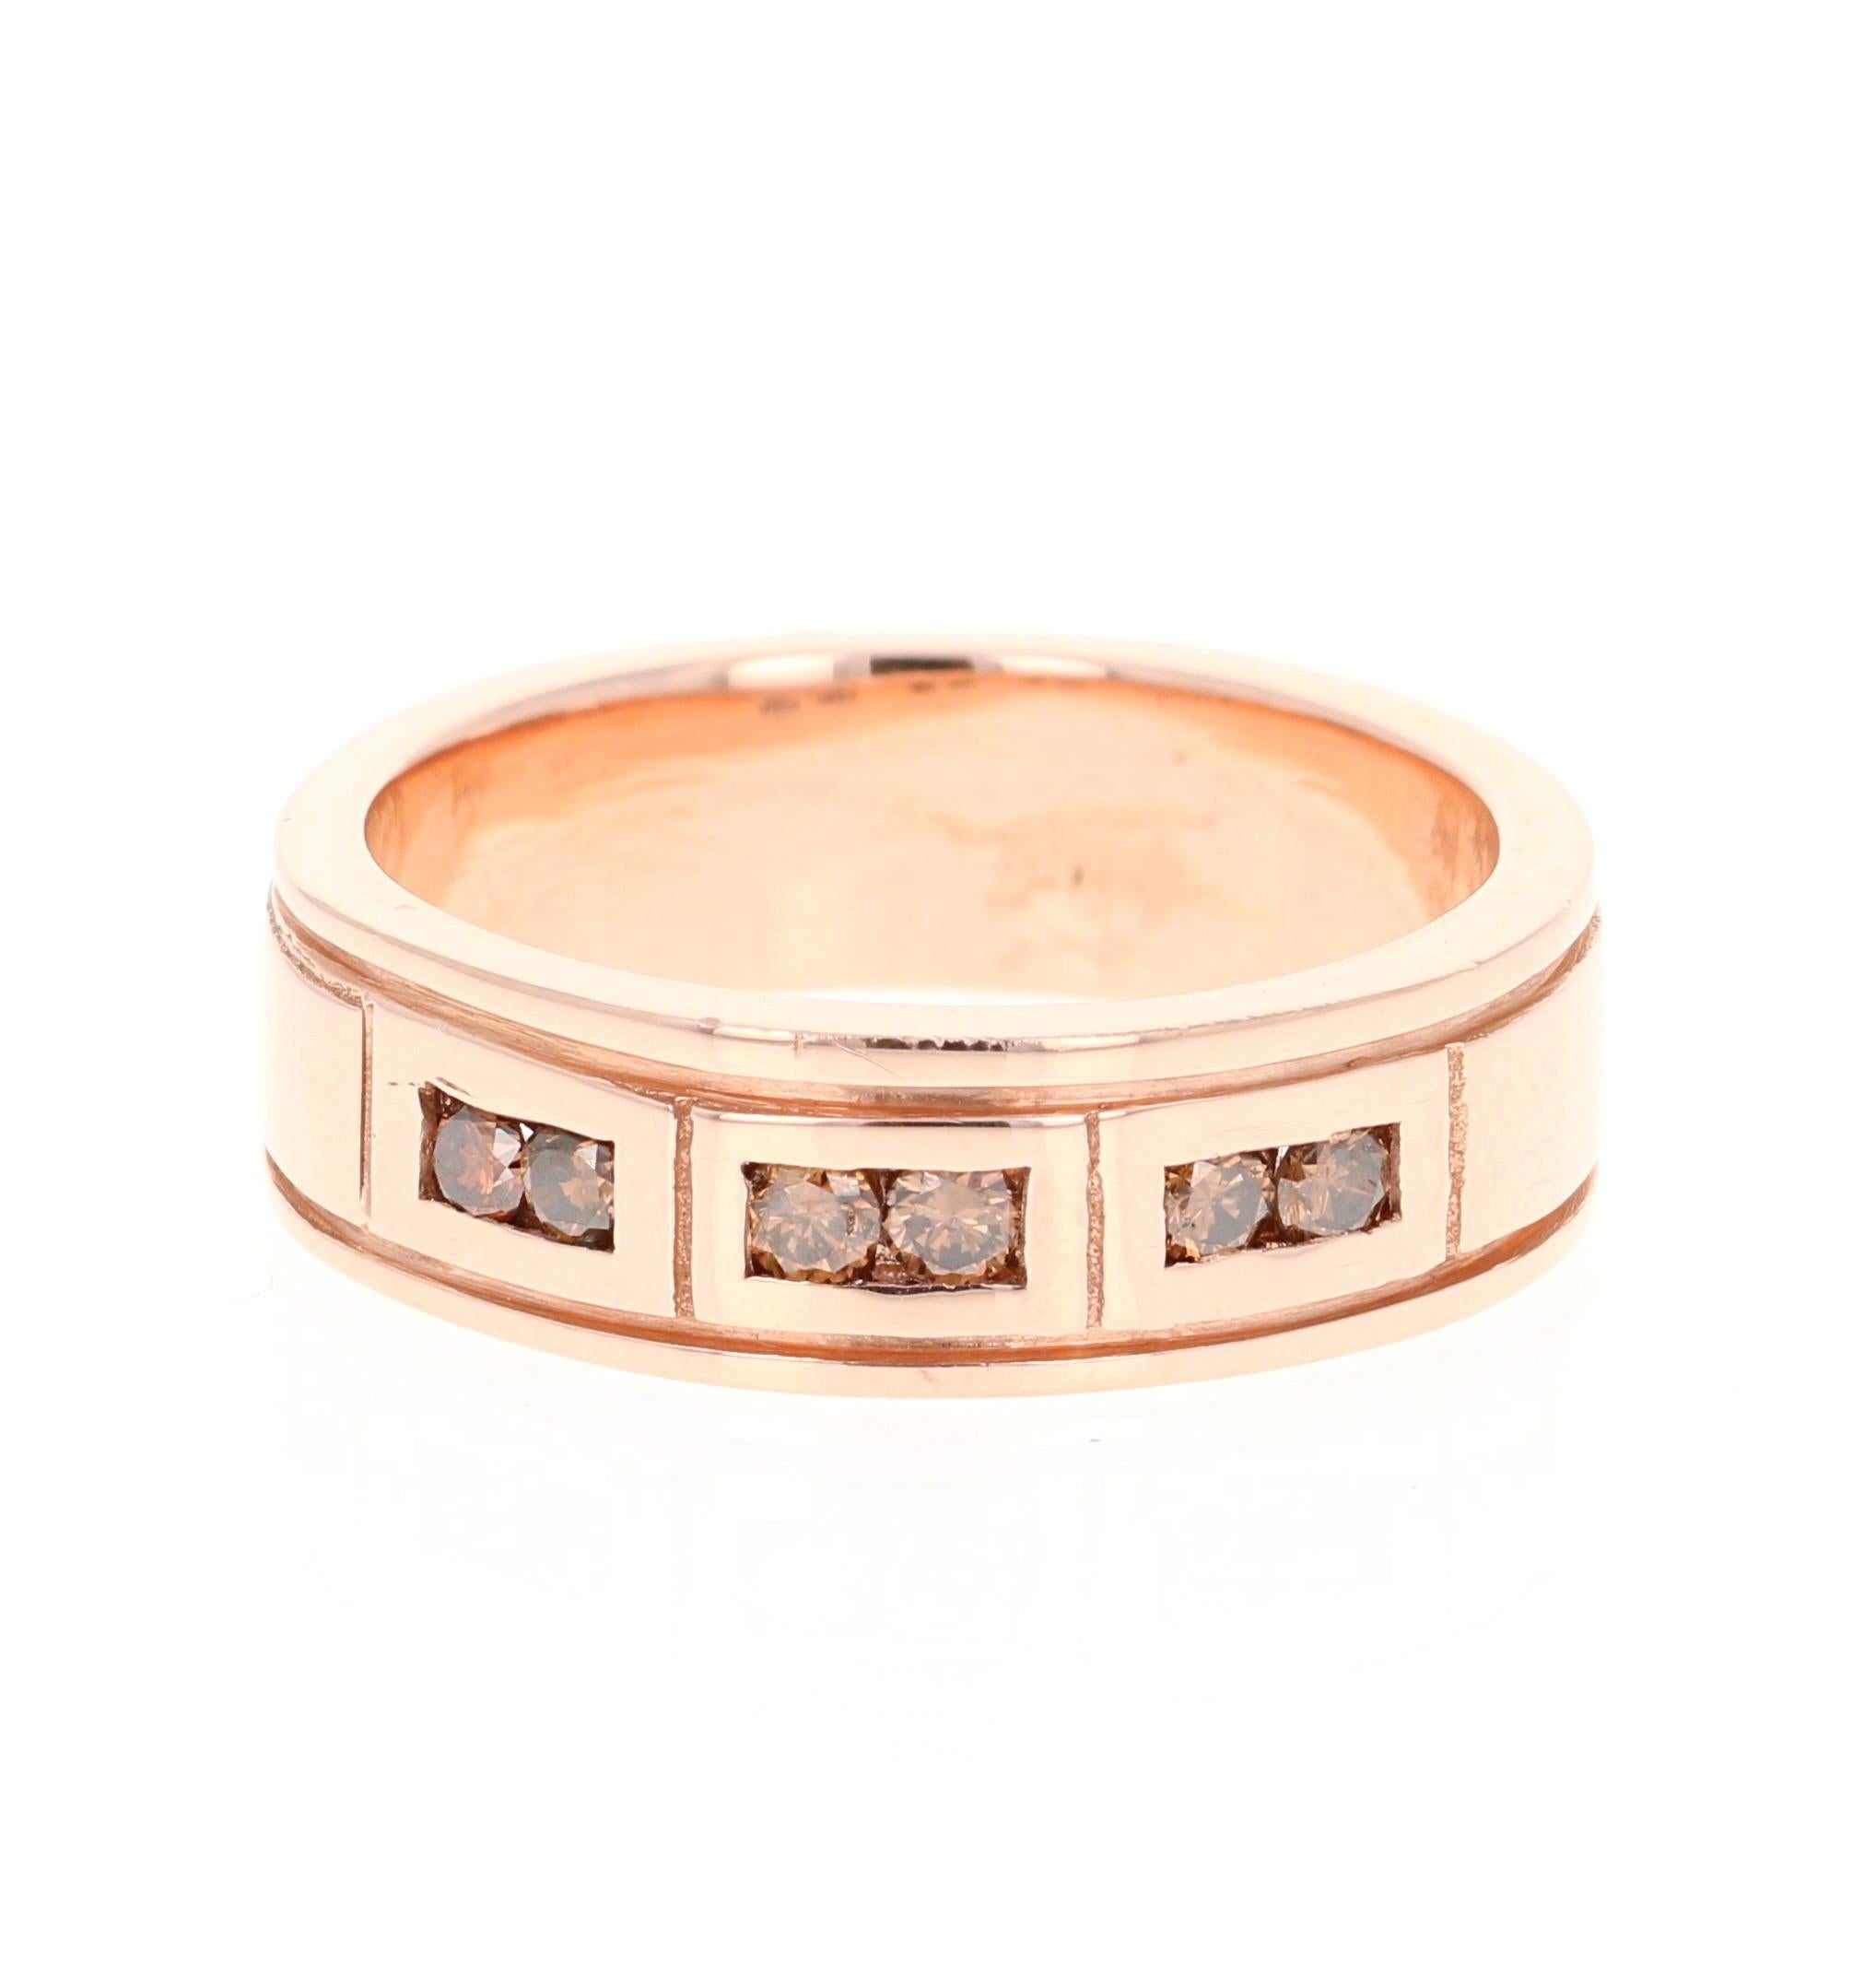 We have a Men's Fine Jewelry Collection as well! One stop shop for all your jewels! 

Calling this band unique is simply an understatement!

This ring is a magnificent and masculine Men's Champagne Diamond Band. It has 6 Round Cut Champagne Colored